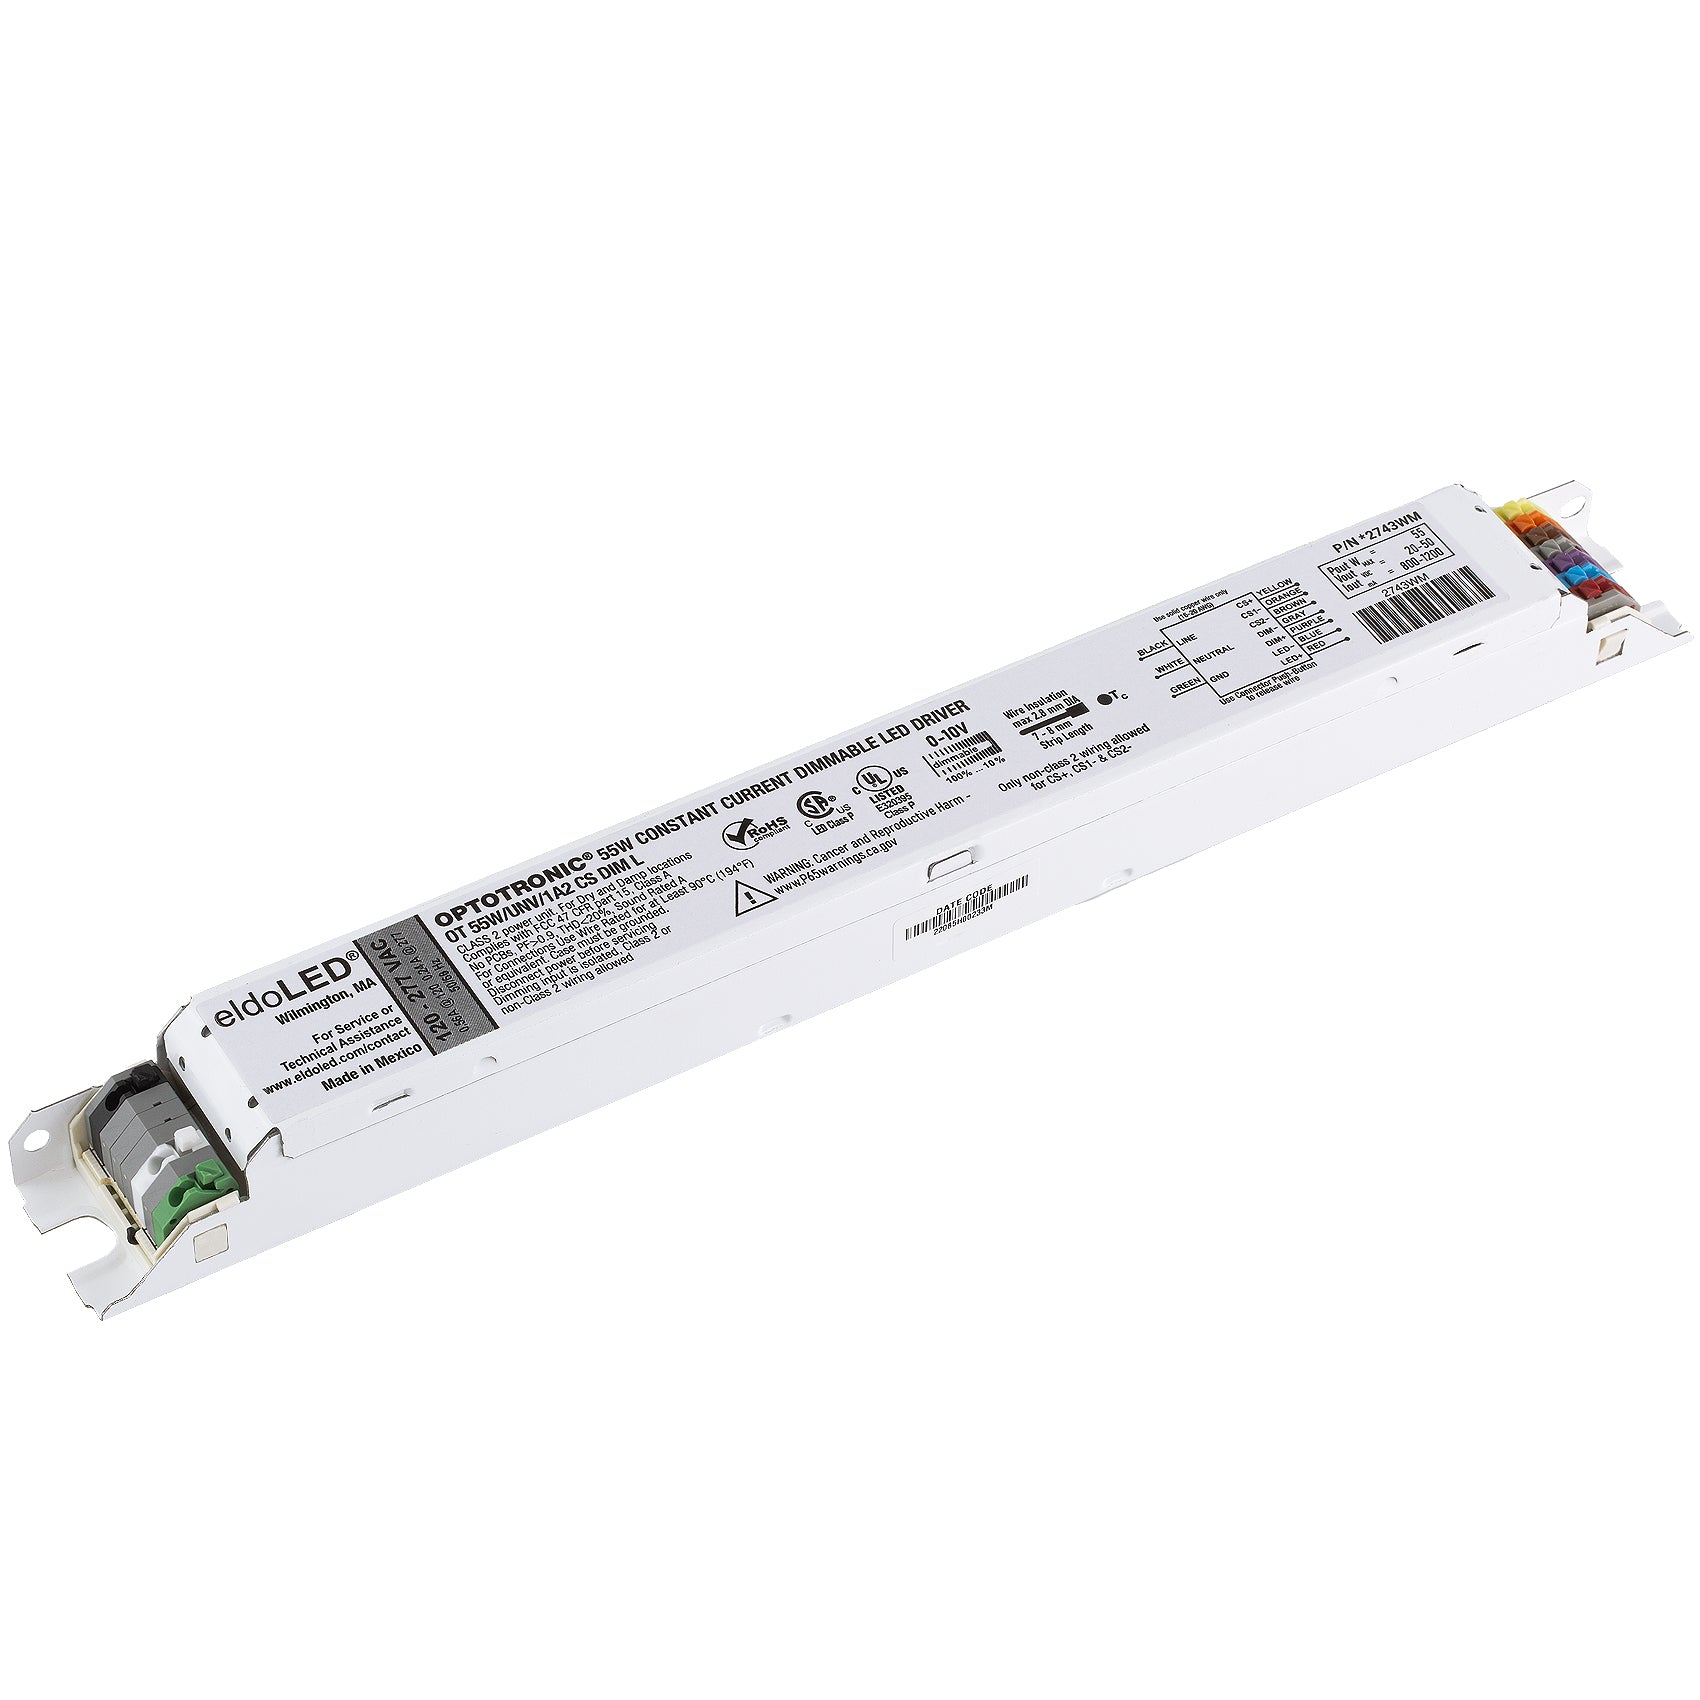 eldoLED *2743WM OPTOTRONIC 55W Constant Current 0-10V Dimmable LED